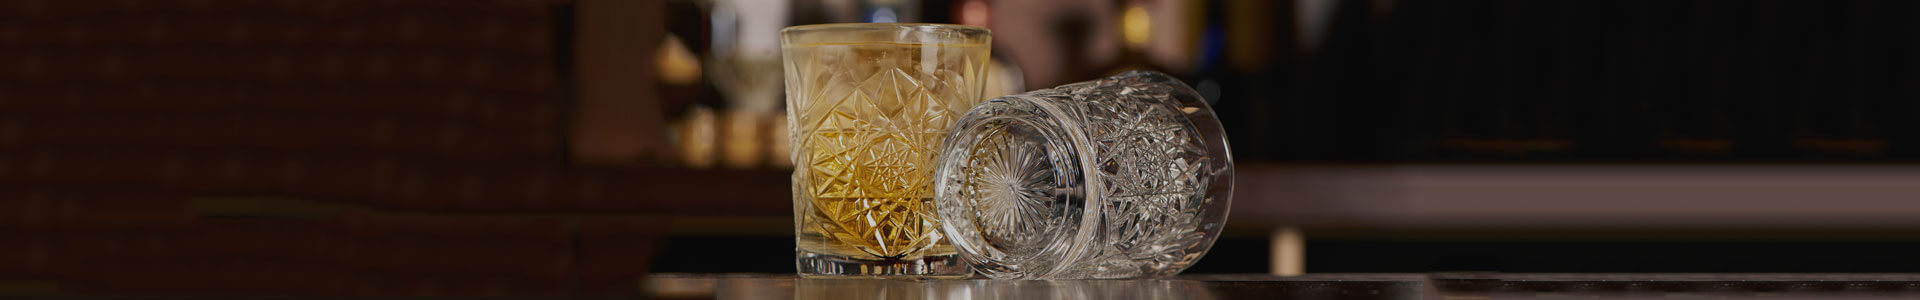 Two tumbler glasses from the Onis Hobstar series. One is standing, the bottom of the other is visible. The sides and base are decorated with an embossed pattern.